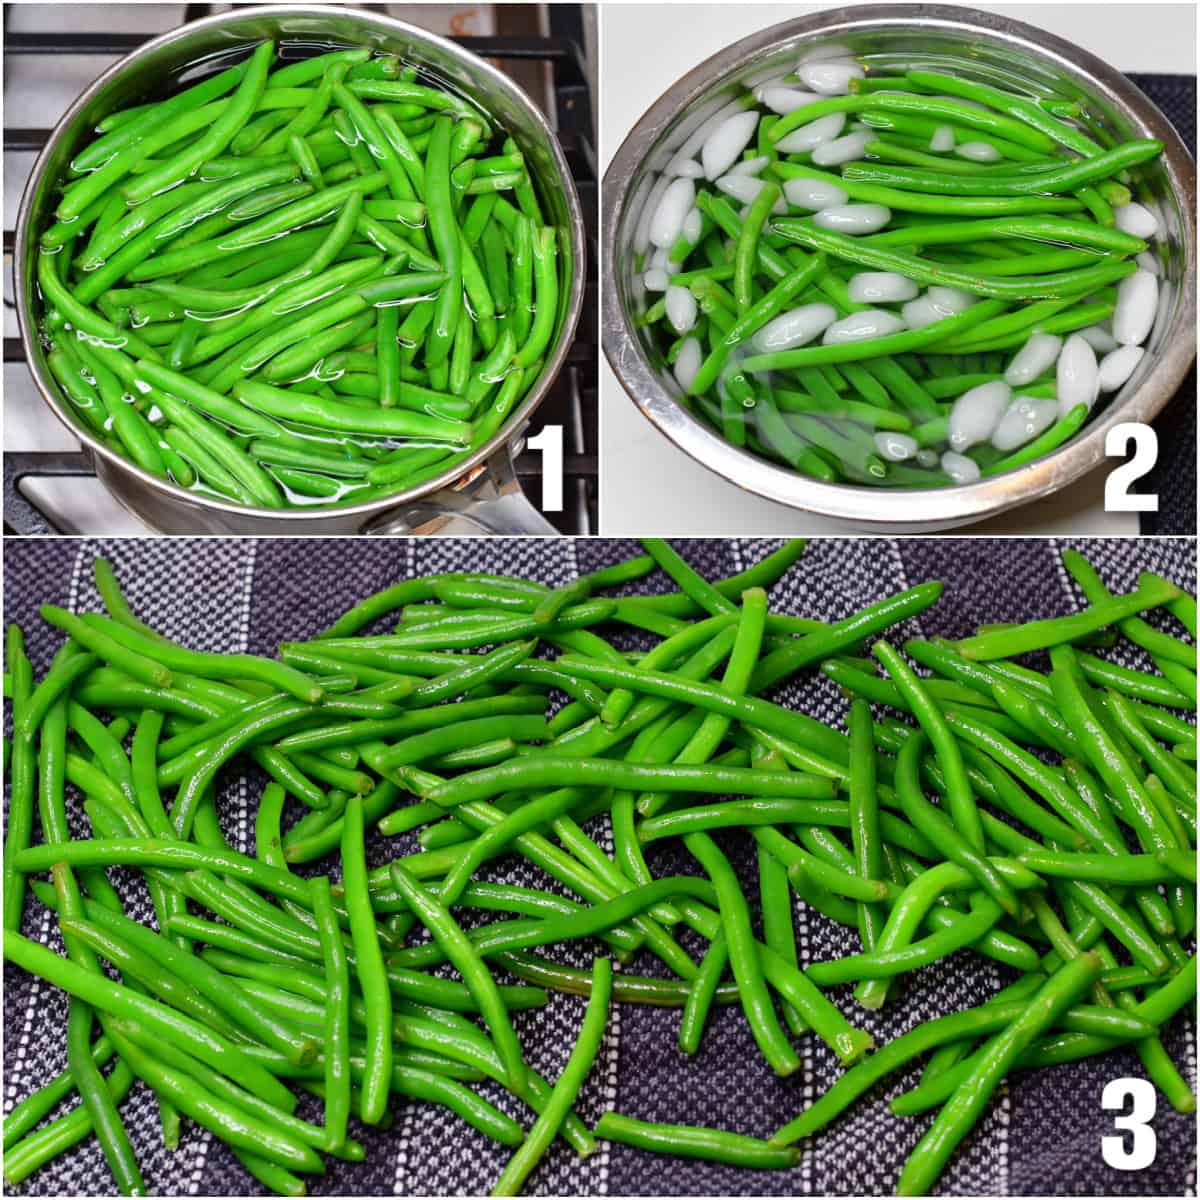 collage of three images blanching green beans in a bowl of ice water and drying them on a towel.